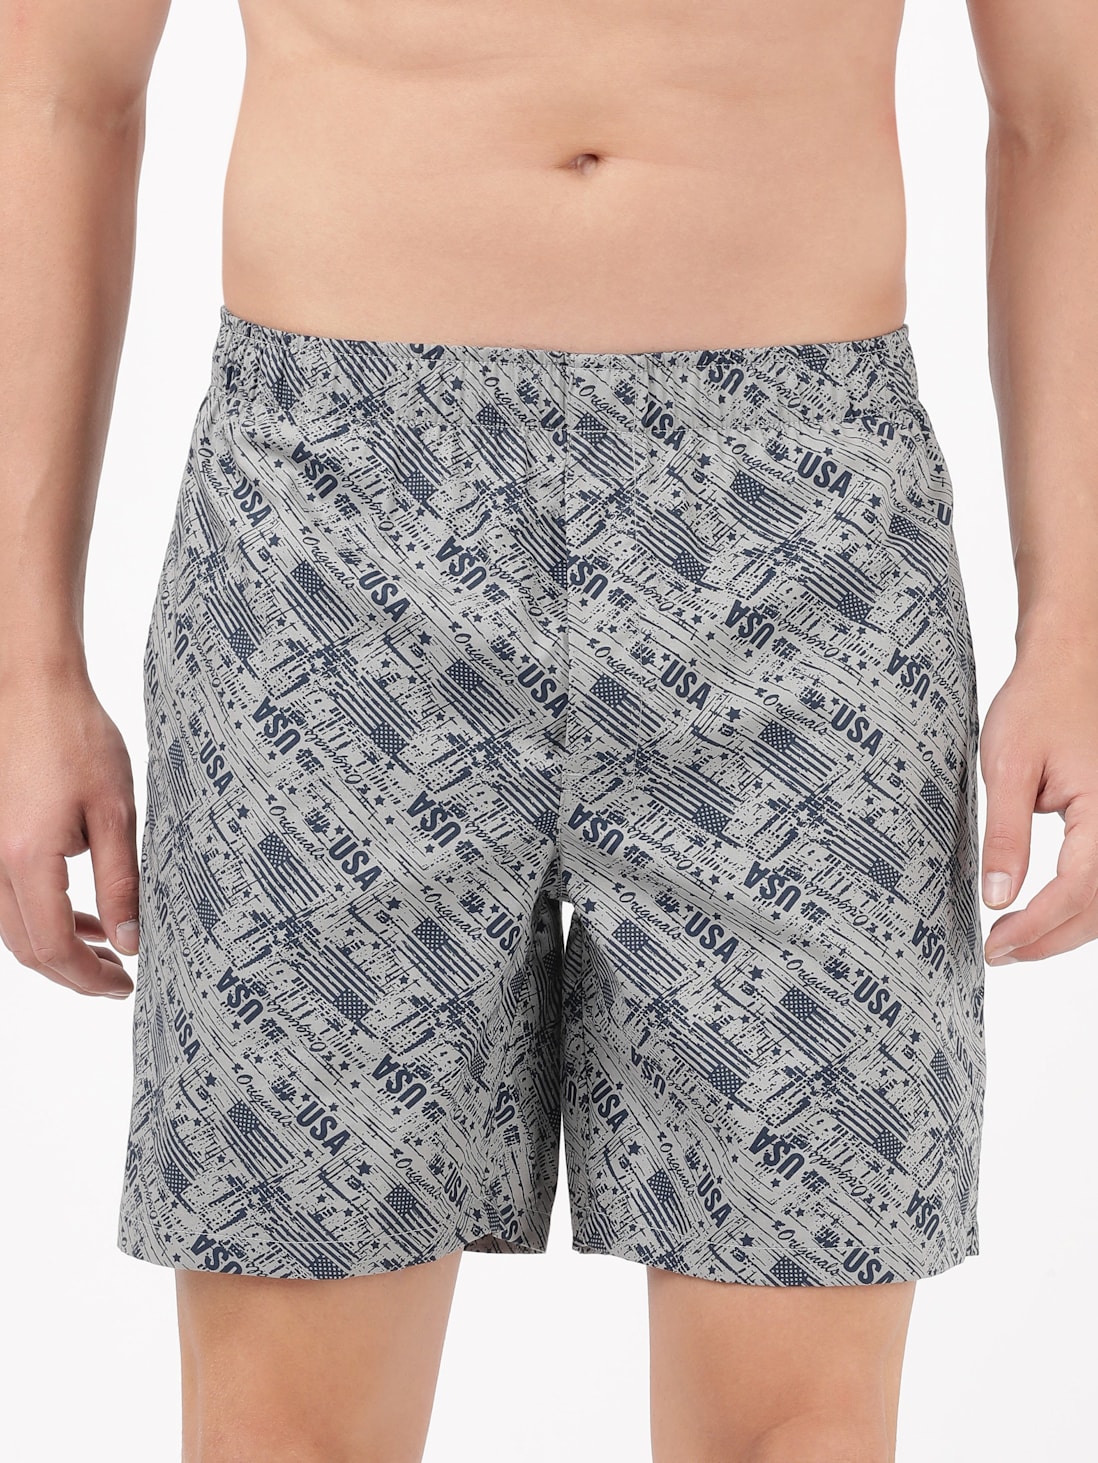 Jockey Men's Super Combed Mercerized Cotton Woven Printed Boxer Shorts with Side Pocket